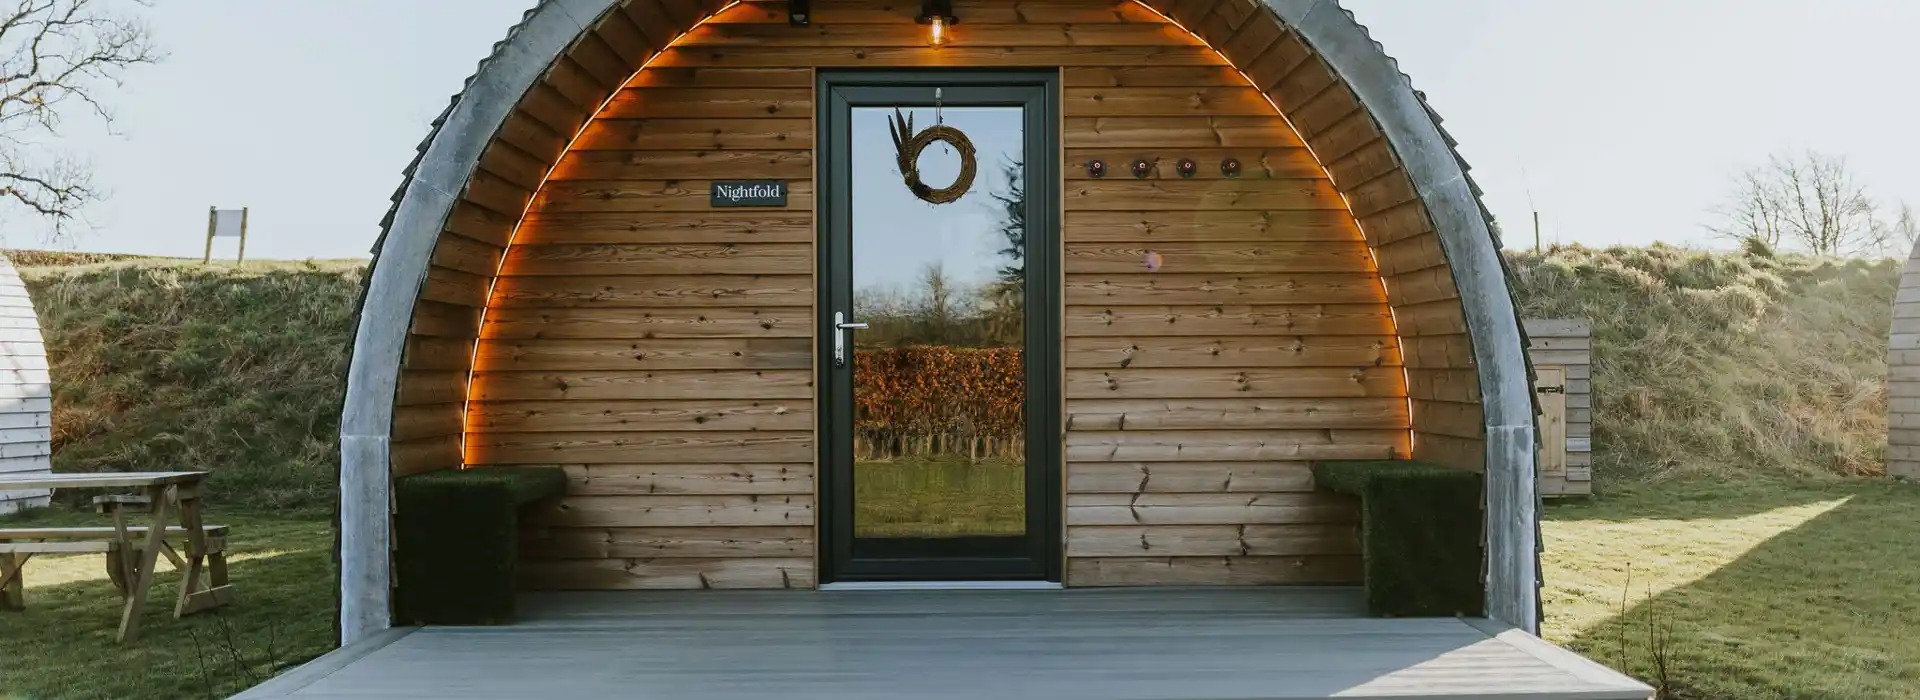 Alnwick camping and glamping pods